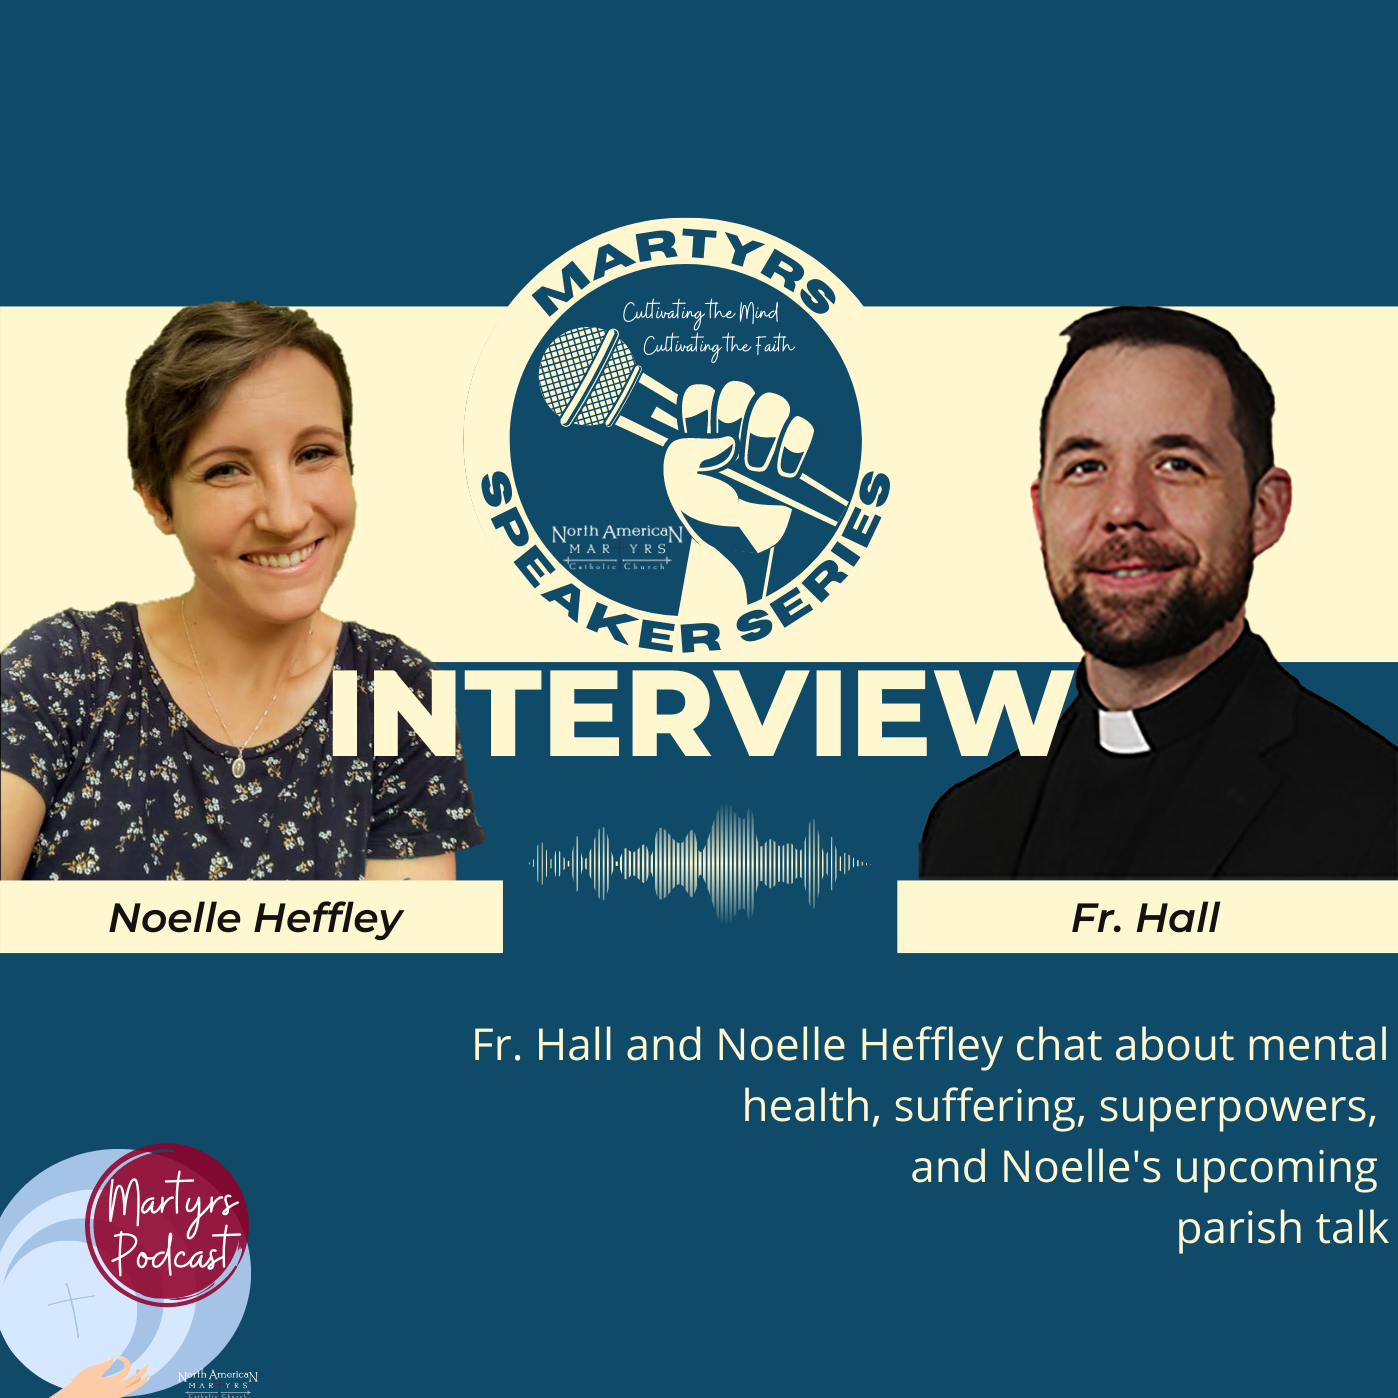 Fr. Hall and Noelle Heffley Talk Mental Health and Meaningful Suffering